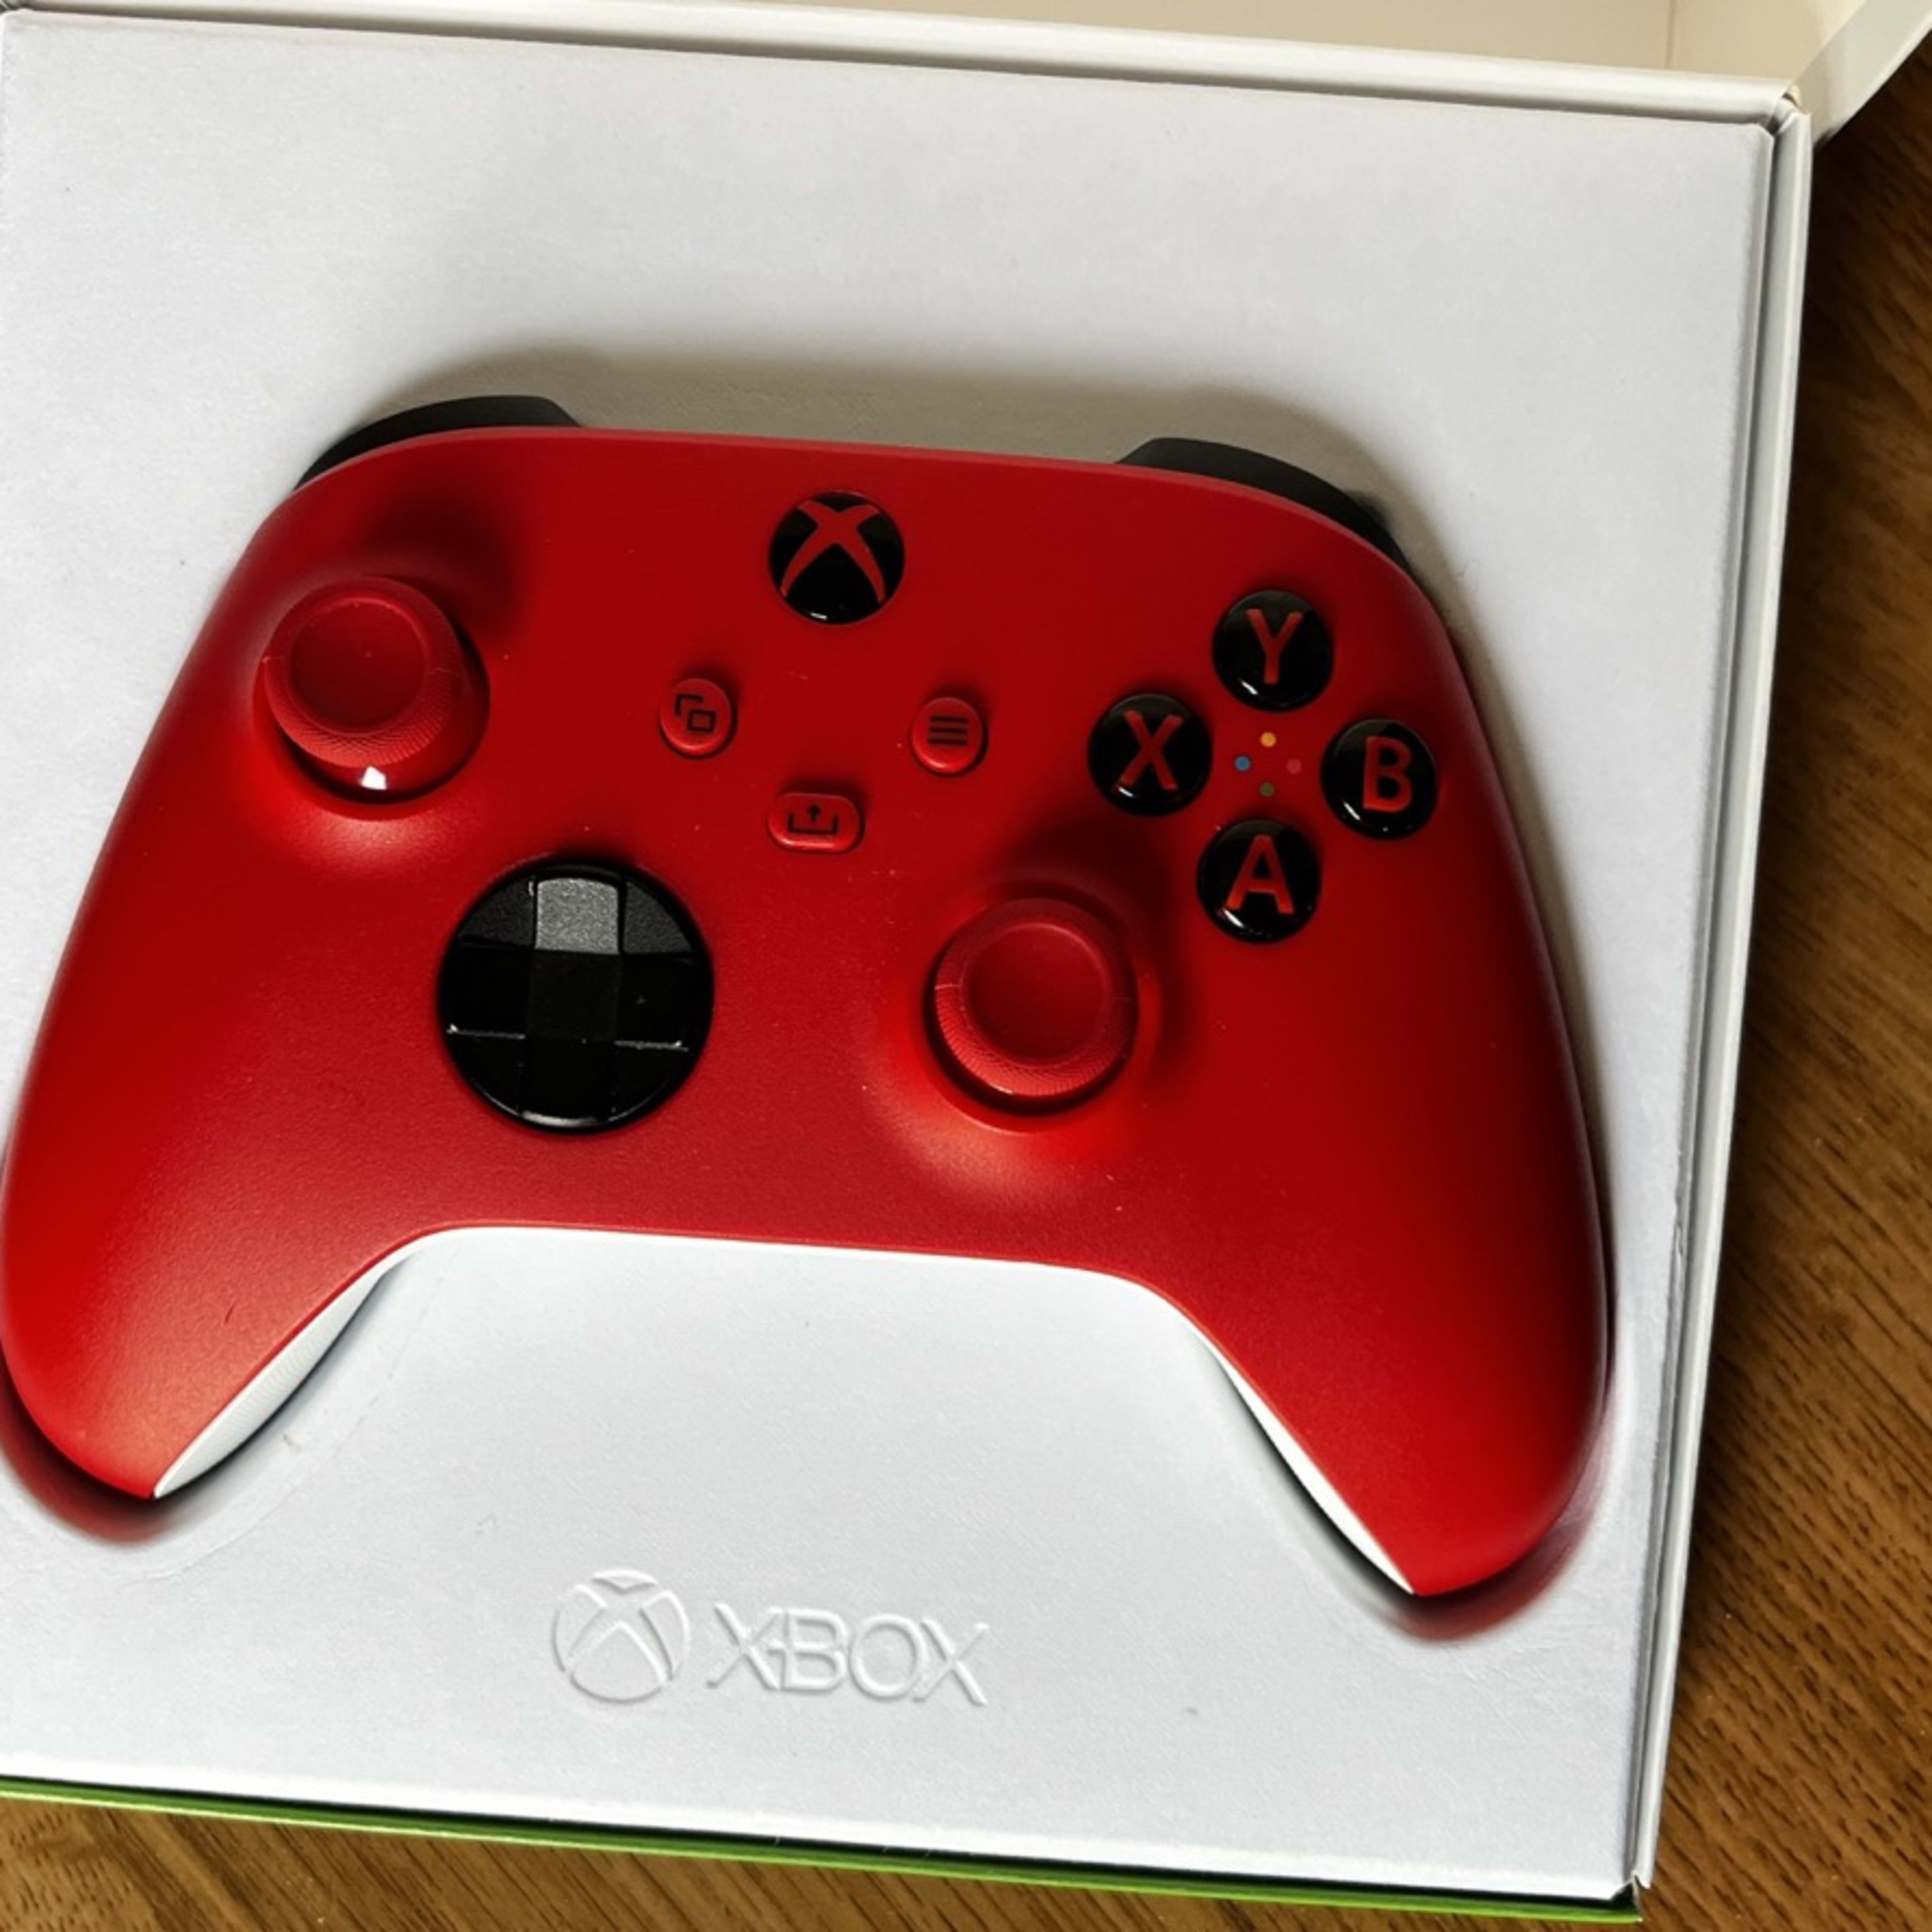 JOYSTICK - XBOX SERIES X/S - PULSE RED EDITION SPECIAL